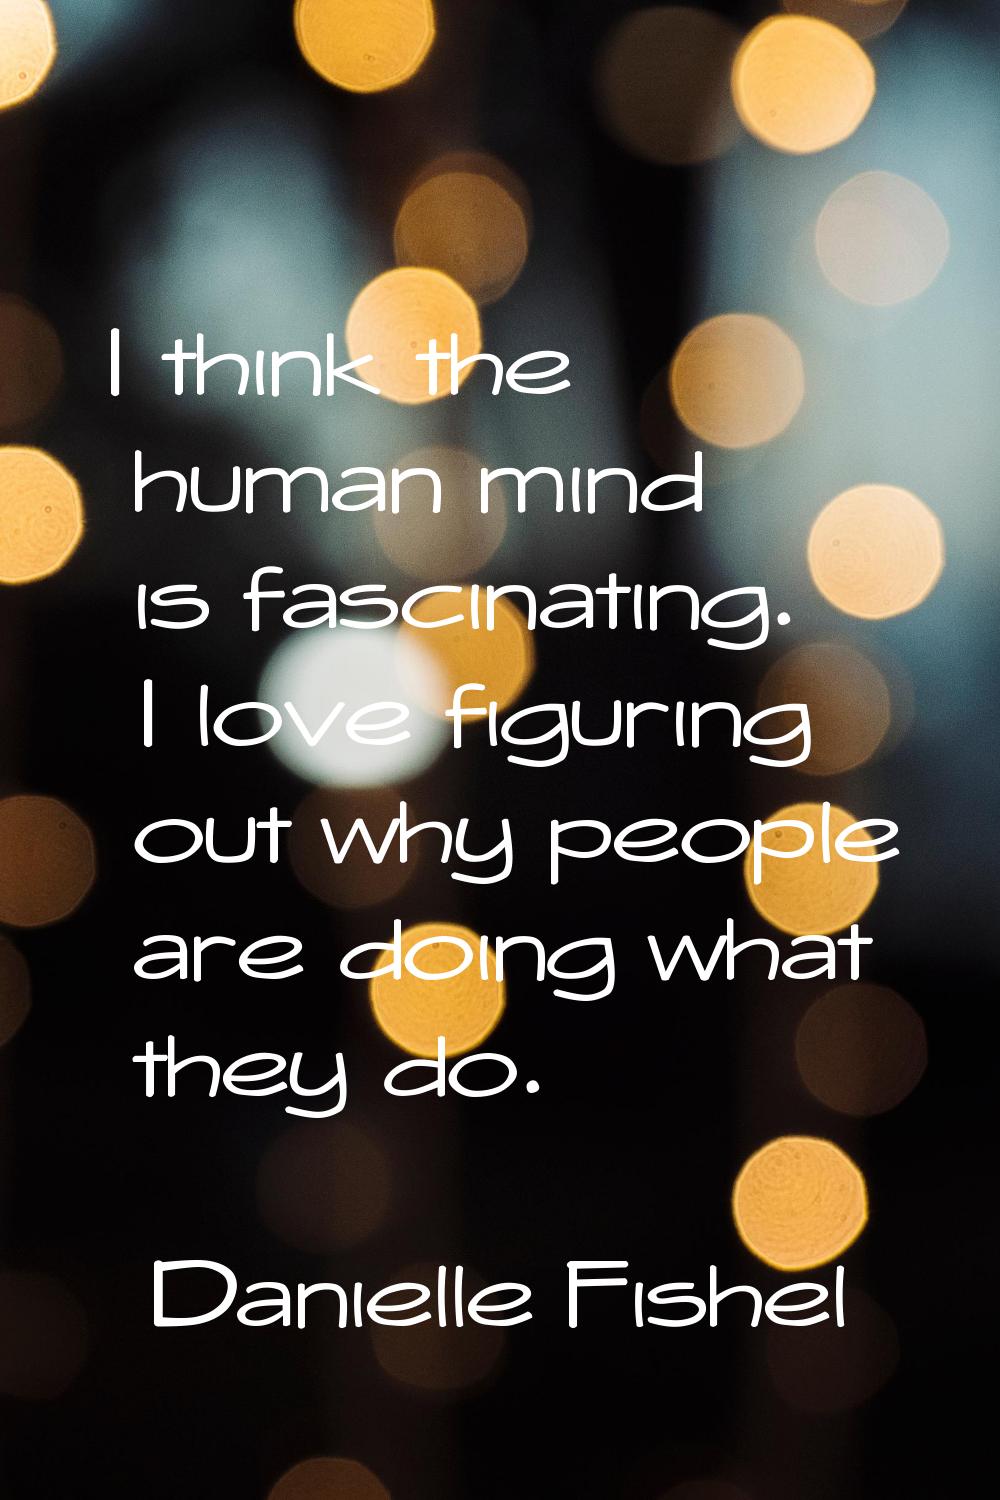 I think the human mind is fascinating. I love figuring out why people are doing what they do.